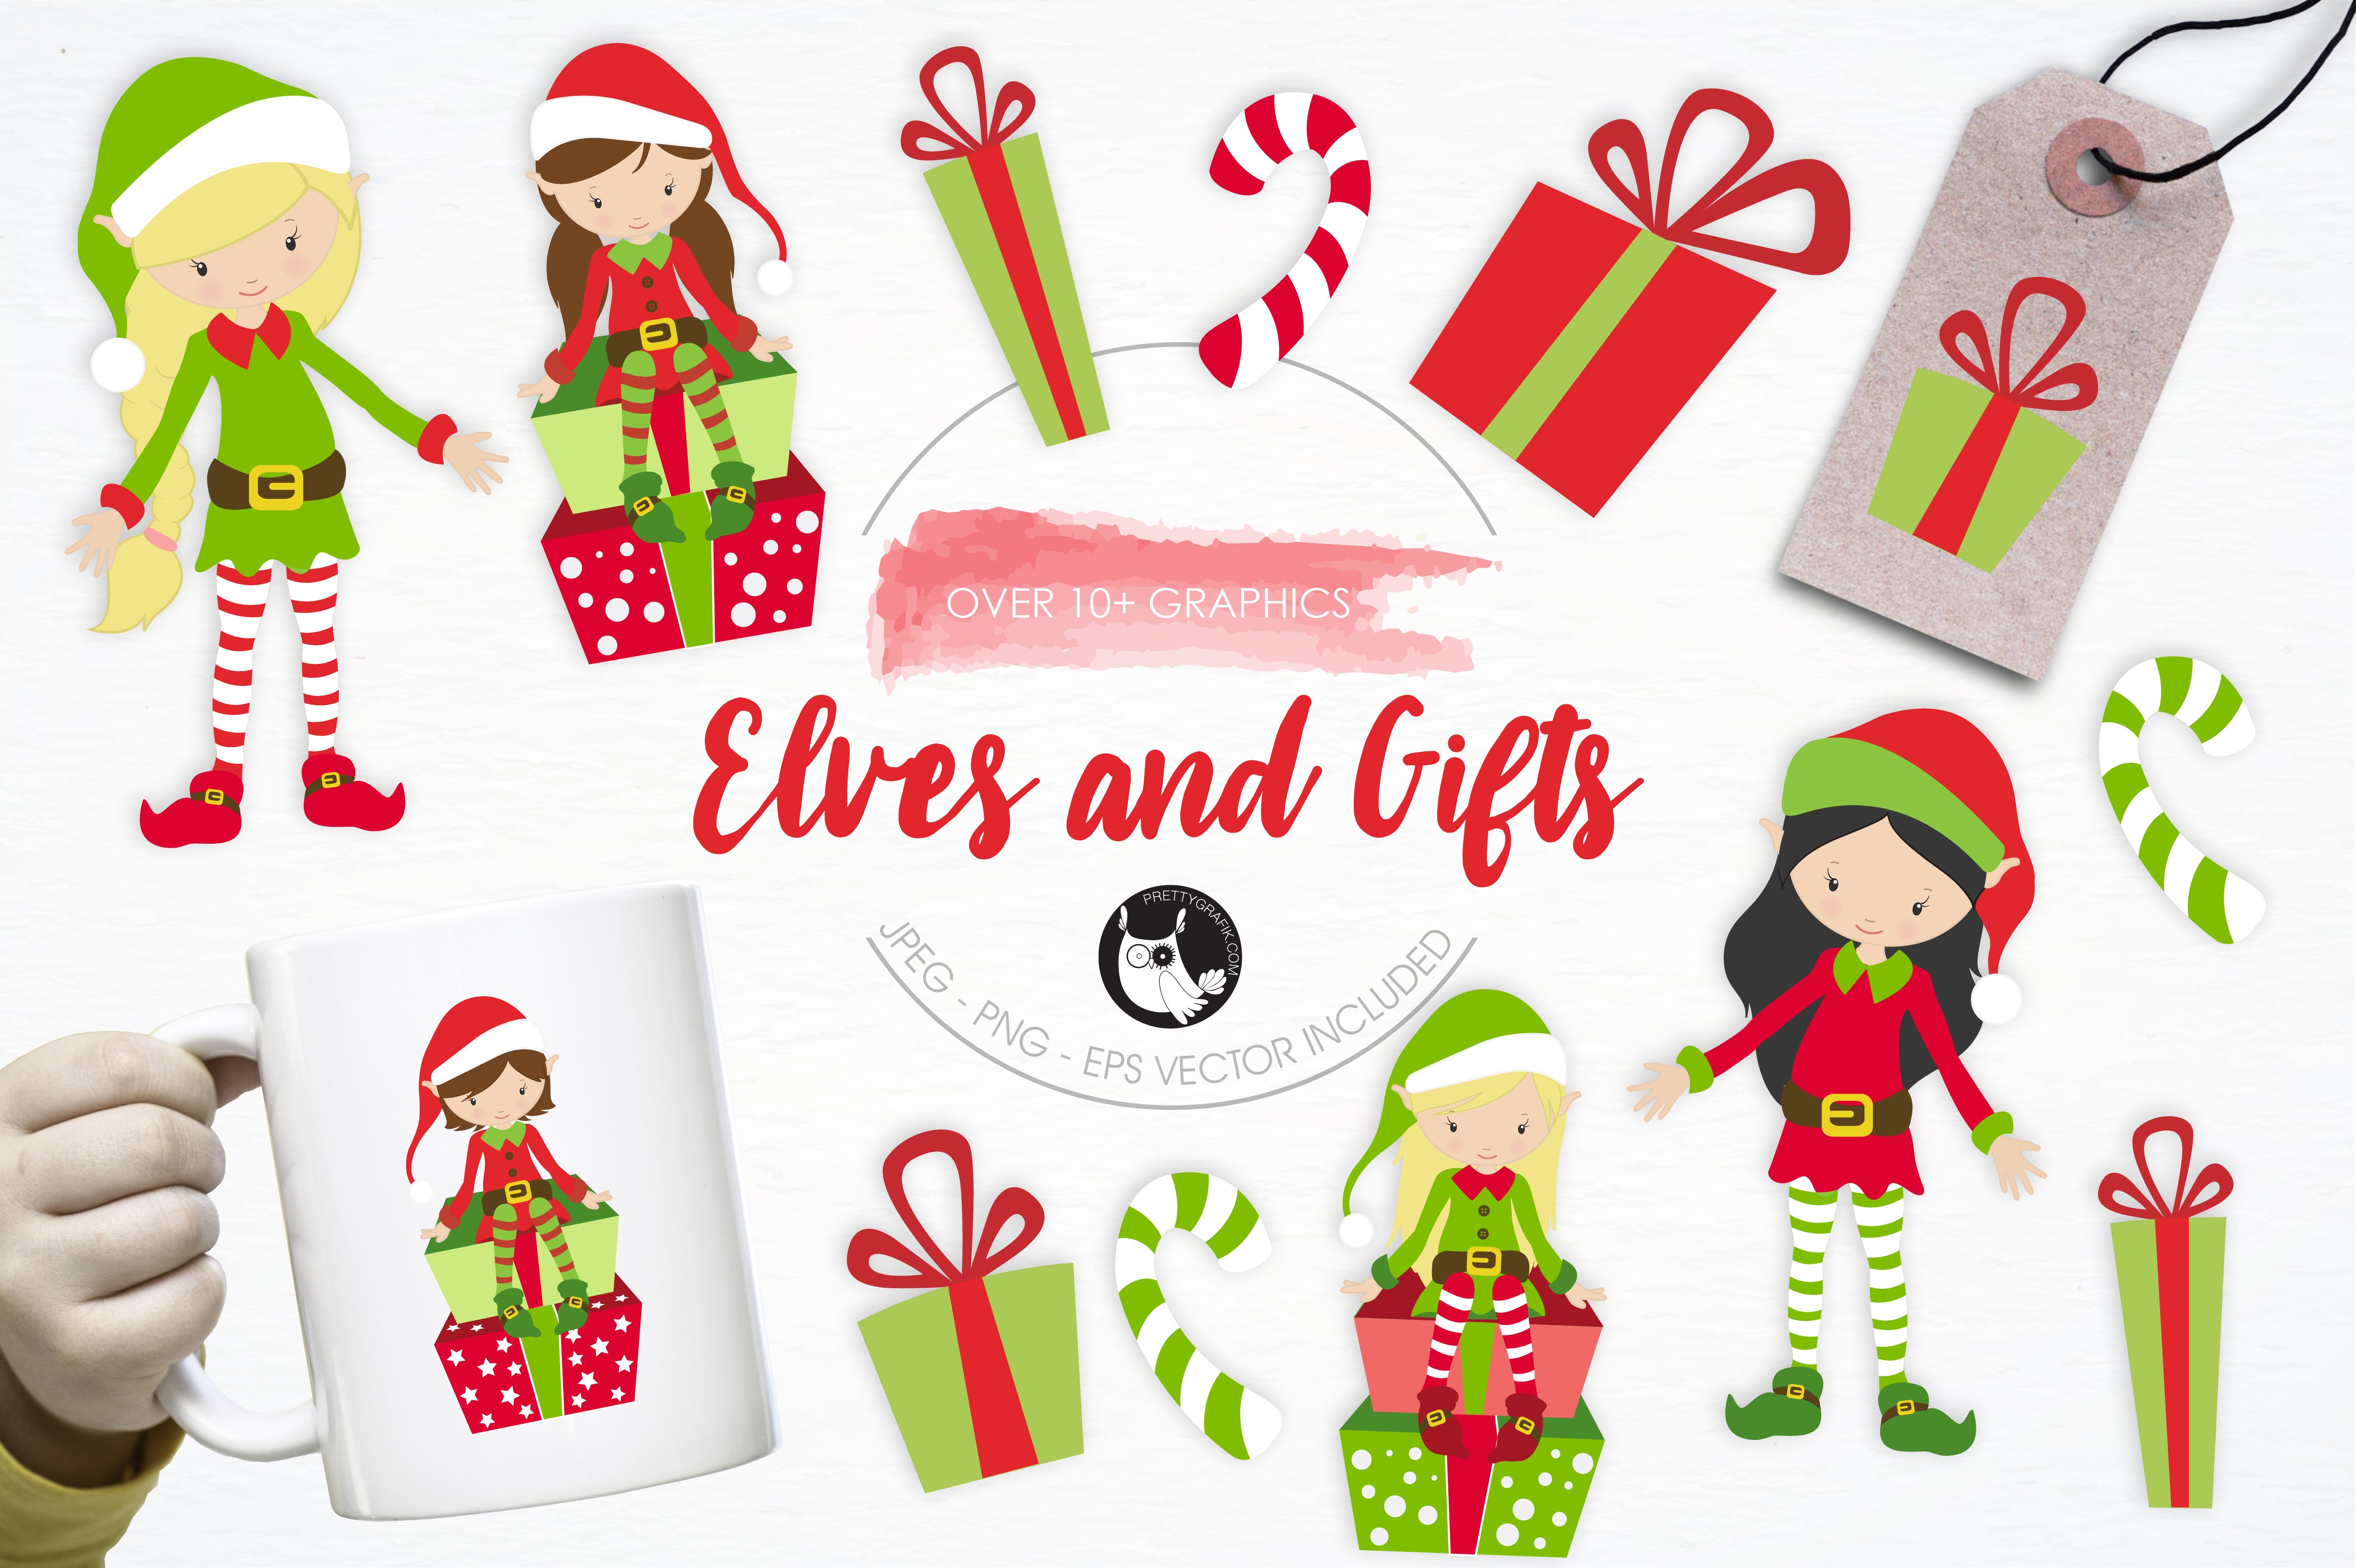 Elves and Gifts illustration pack - Vector Image